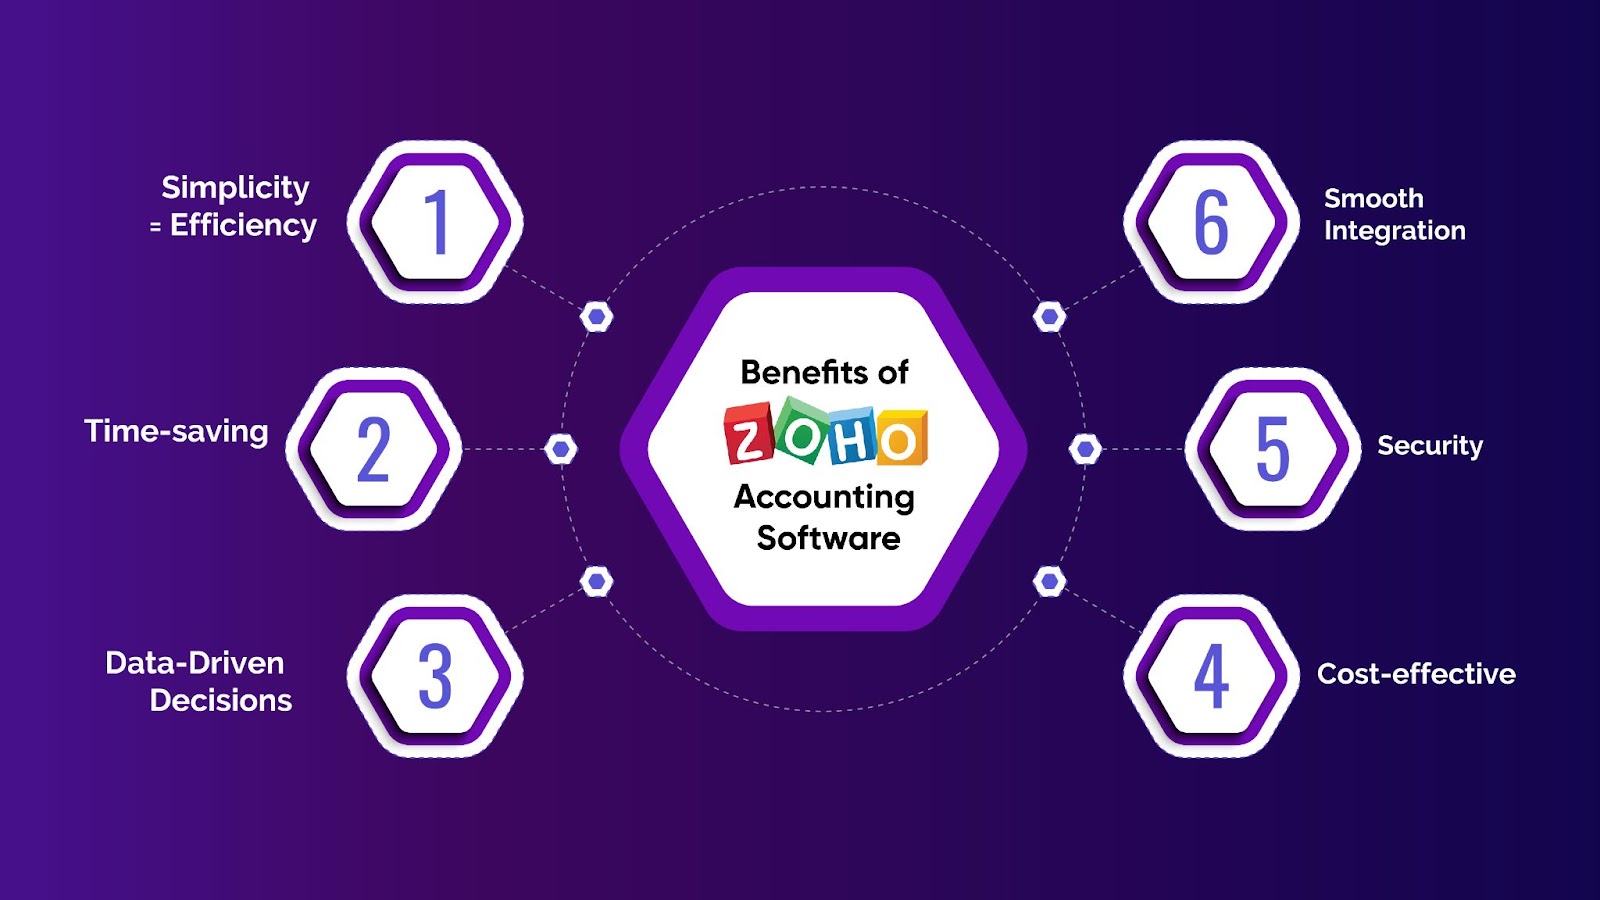  Benefits of Zoho Accounting Software